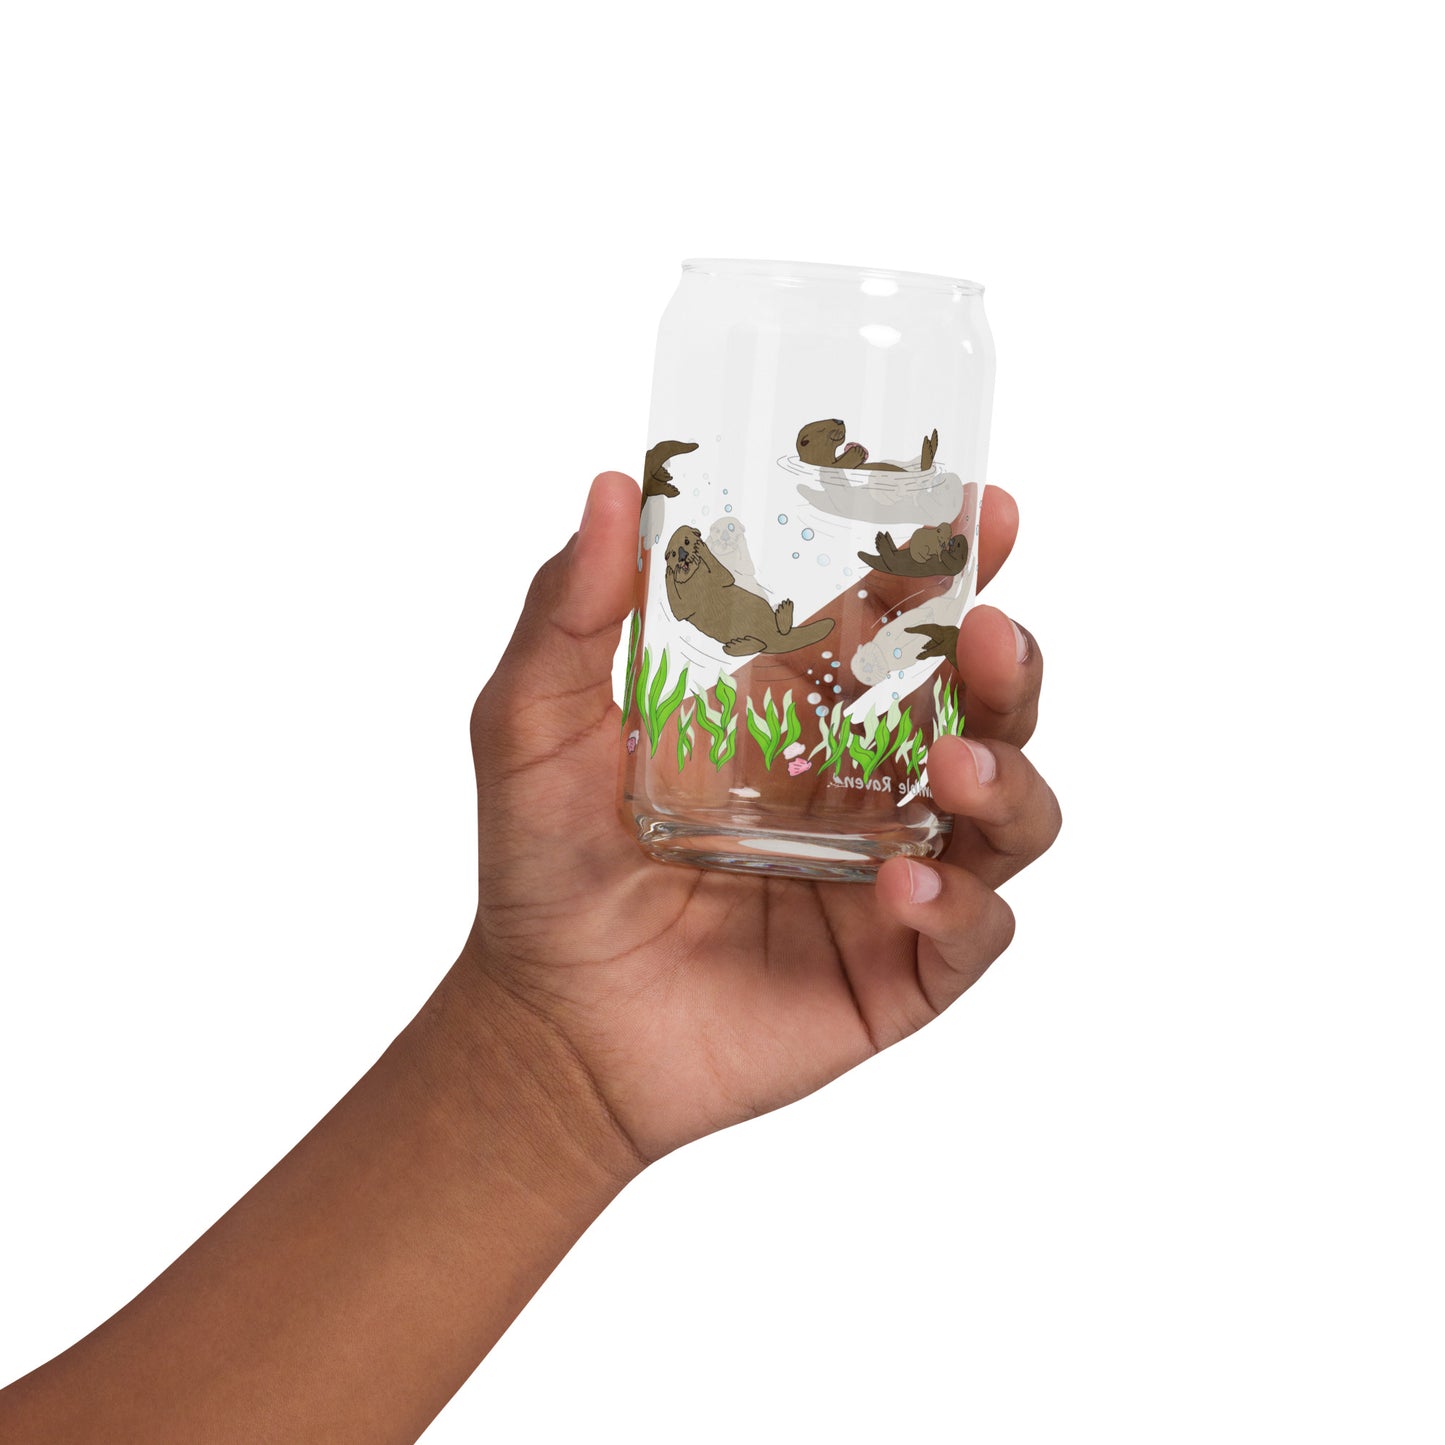 Can-shaped glass holds 16 fluid ounces. Has a design of sea otters swimming above the seaweed with bubble and shell accents. Shown in model's hand.